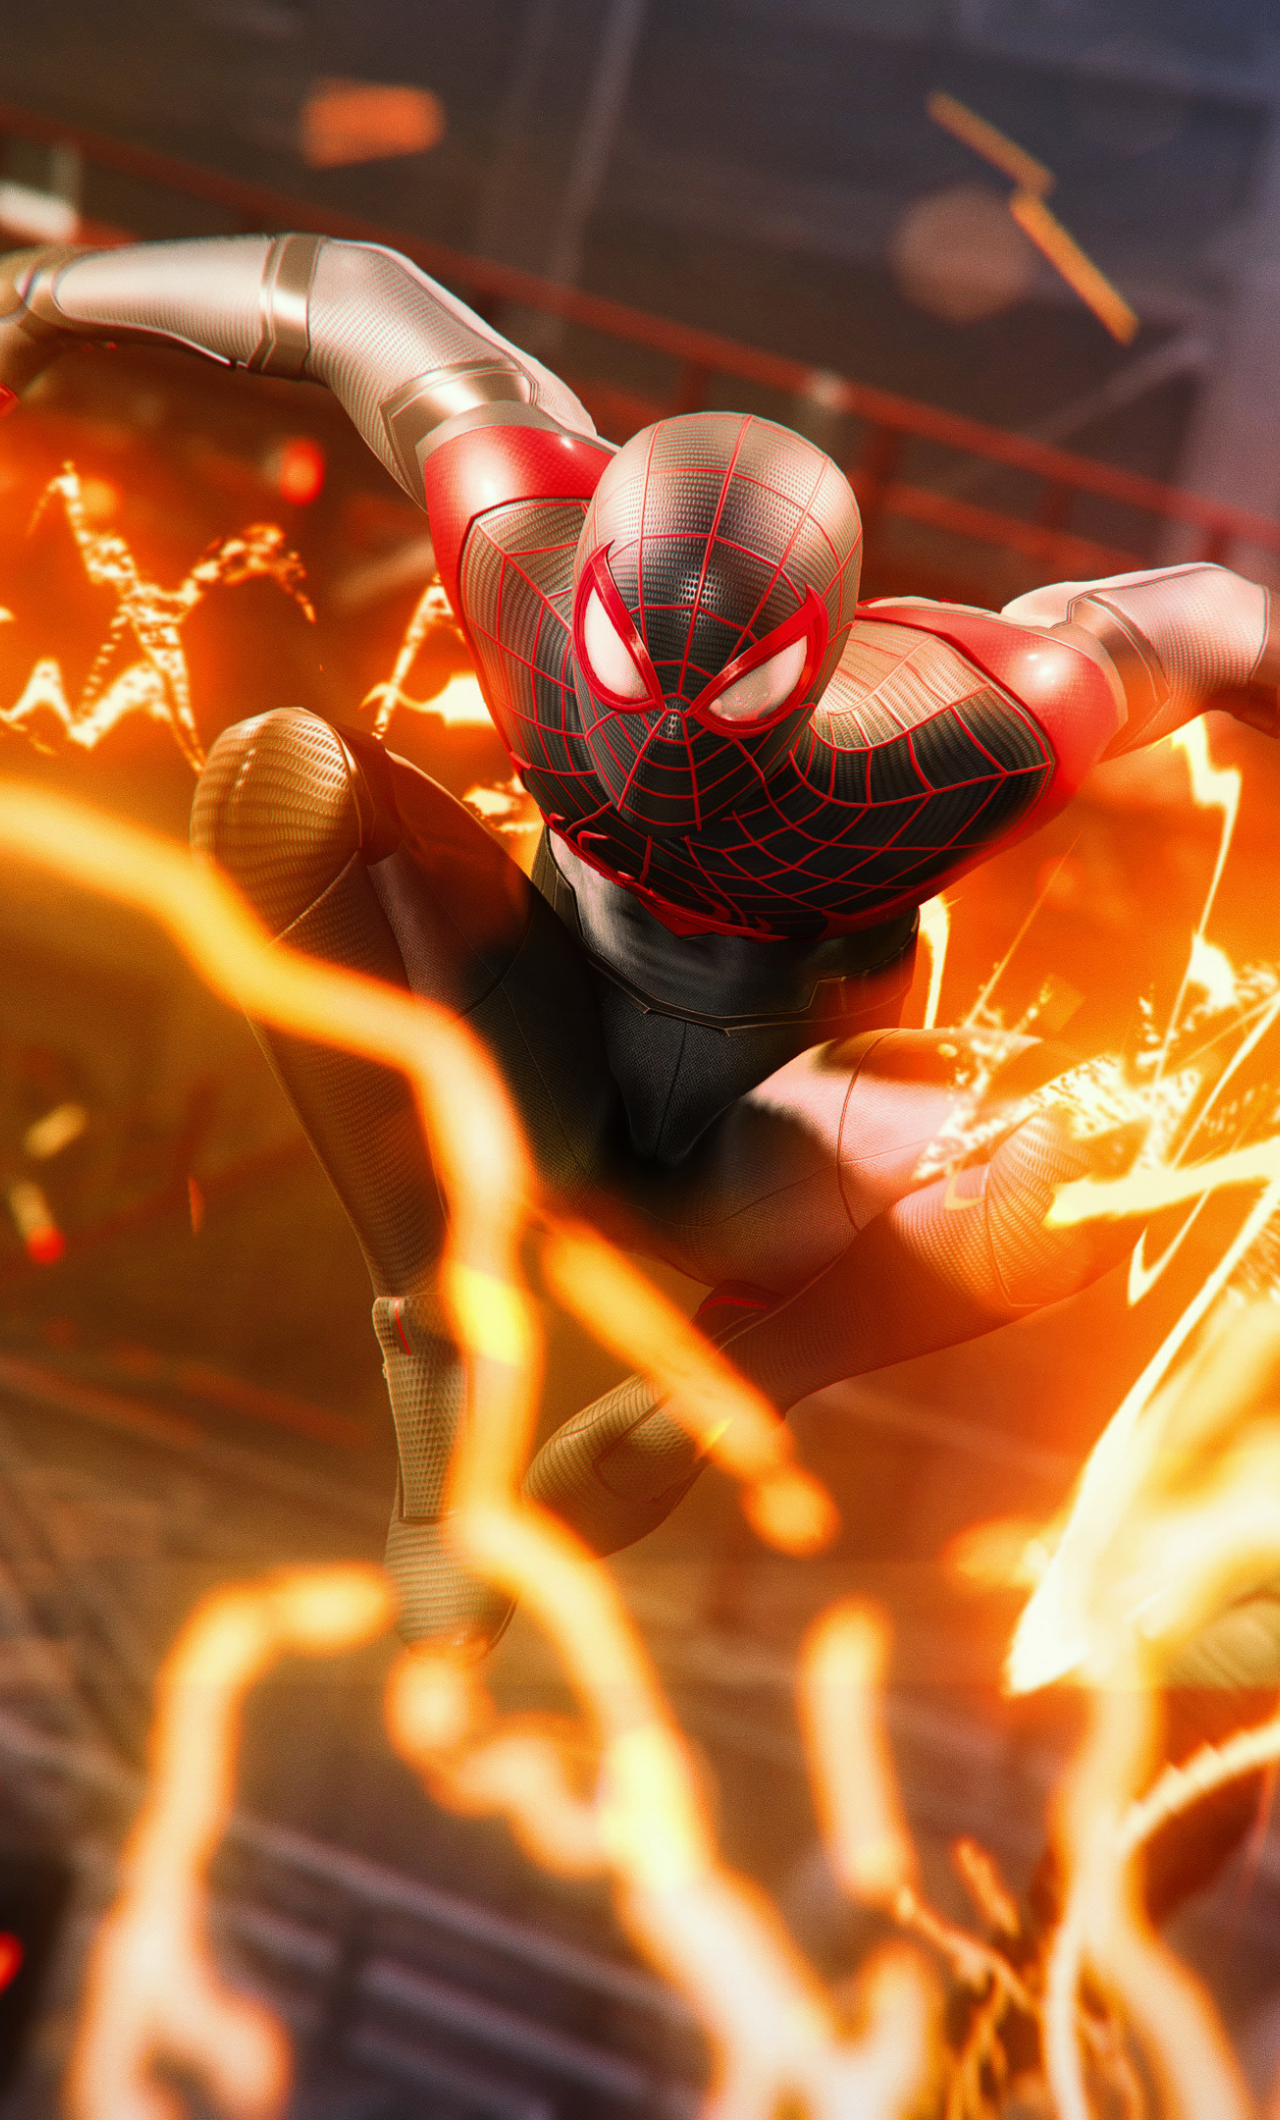 Download wallpaper x miles morales video game ps iphone plus x hd background